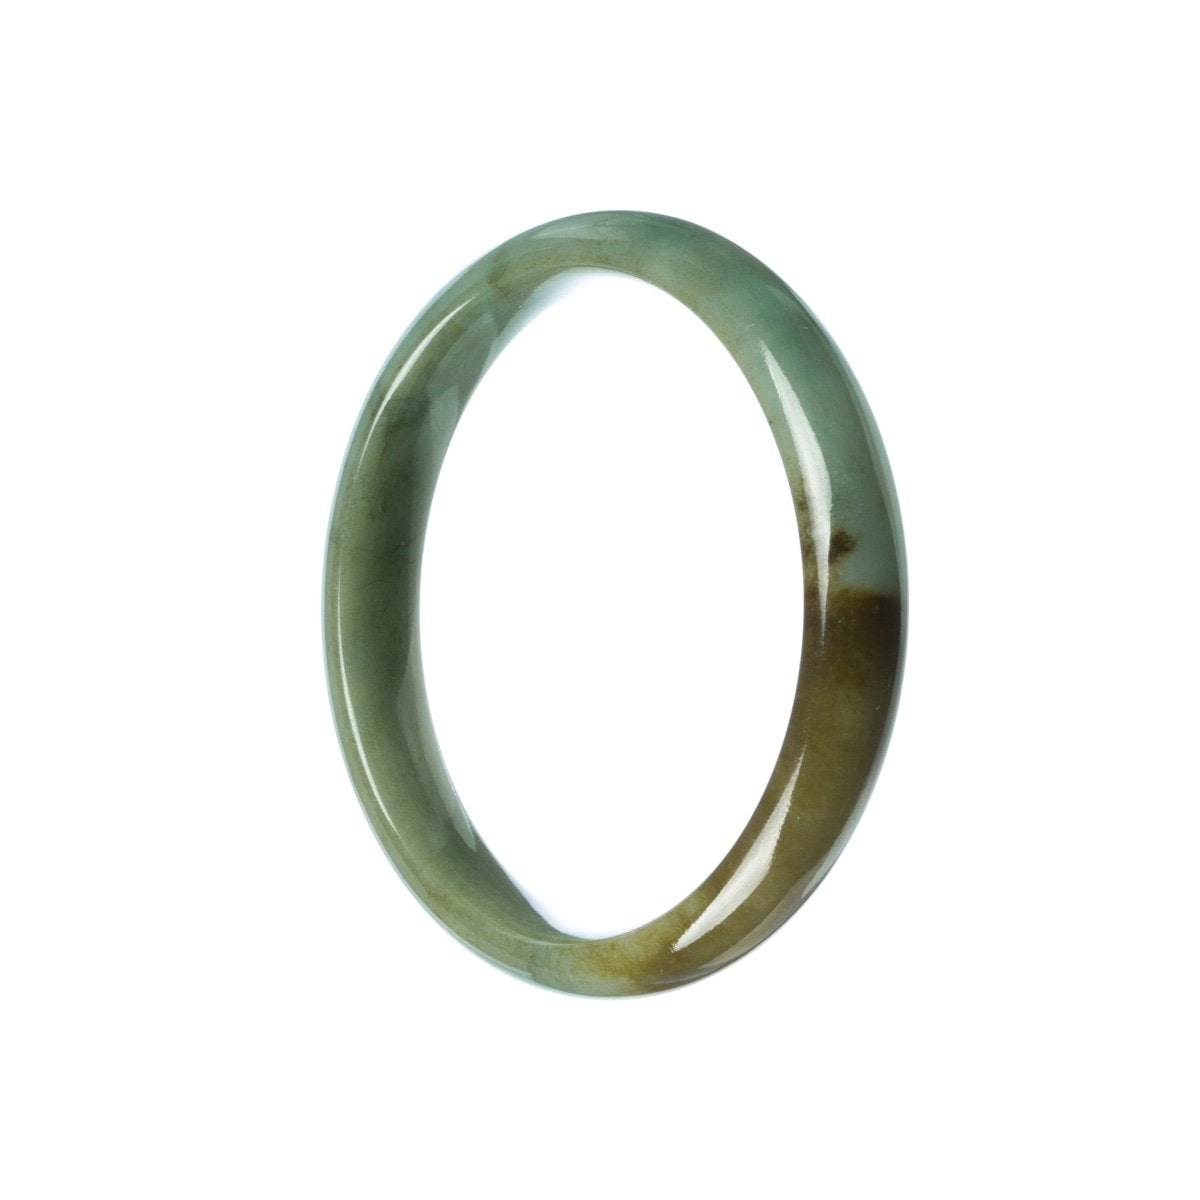 A half moon-shaped, authentic jadeite bangle in a beautiful combination of natural green and brown hues.